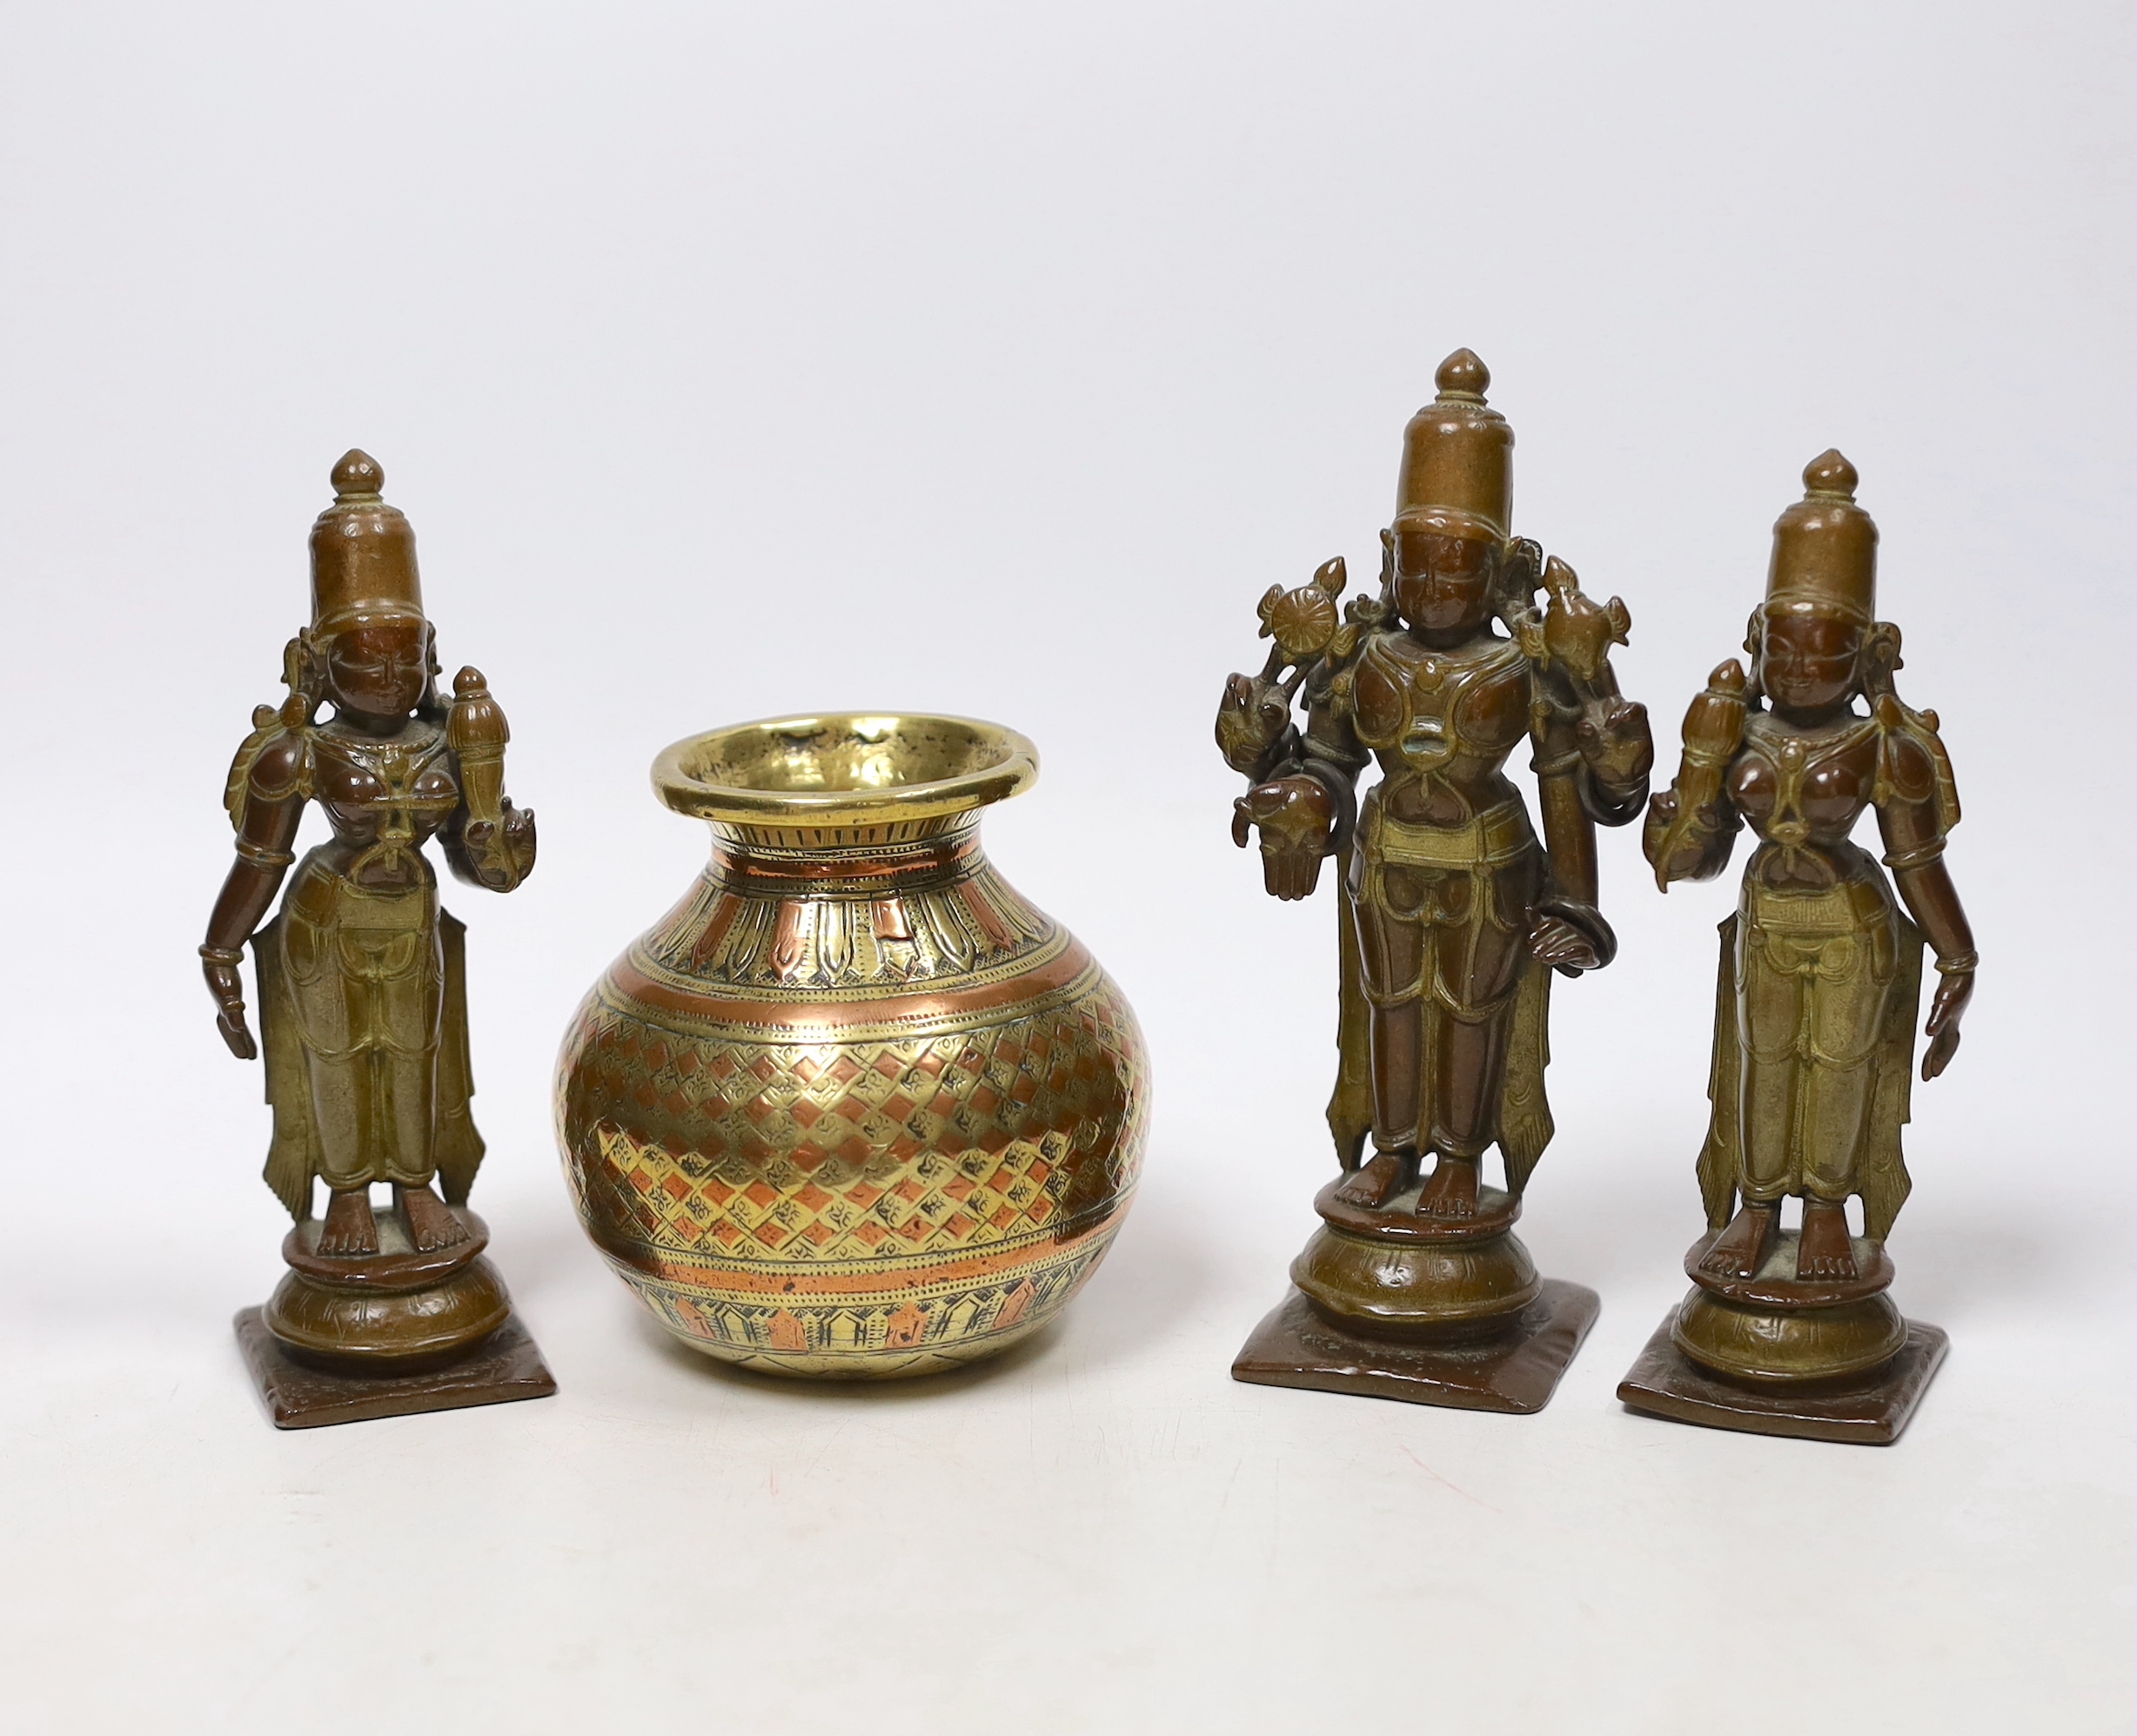 A Ganga-Jamuna figure of Vishnu and two consorts, 18th century together with a small South Indian